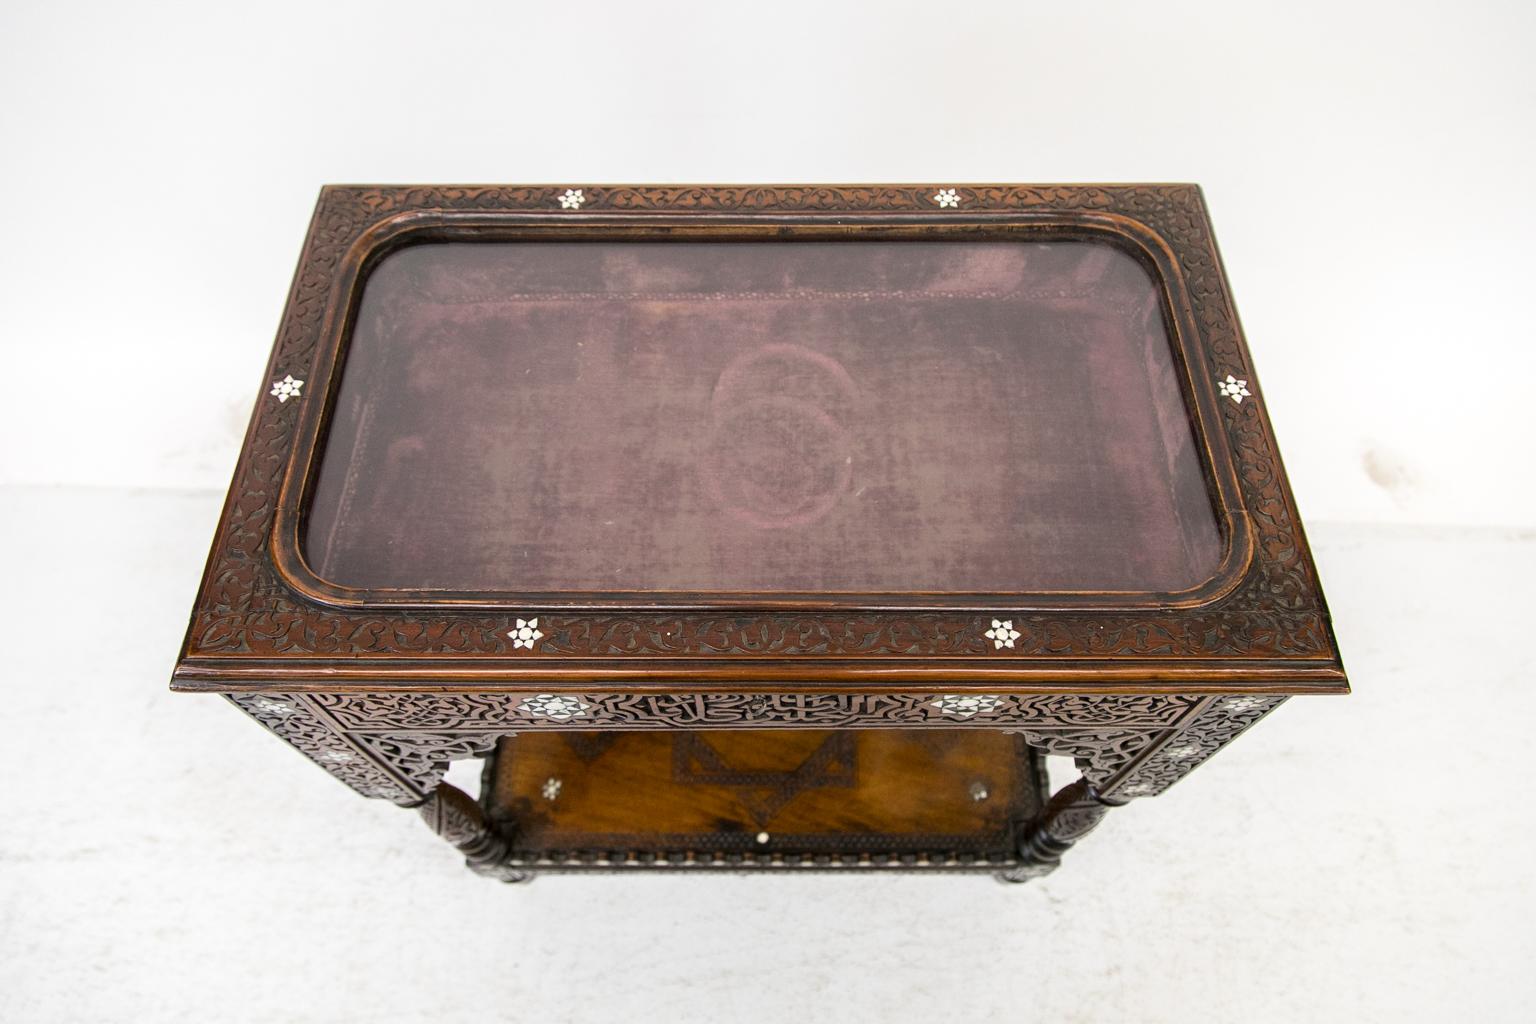 This vitrine table is carved overall with arabesques and geometric designs, and is inlaid with mother of pearl and stylized flowers. The interior display area is lined with padded burgundy baize fabric. There is a lower shelf that is carved and